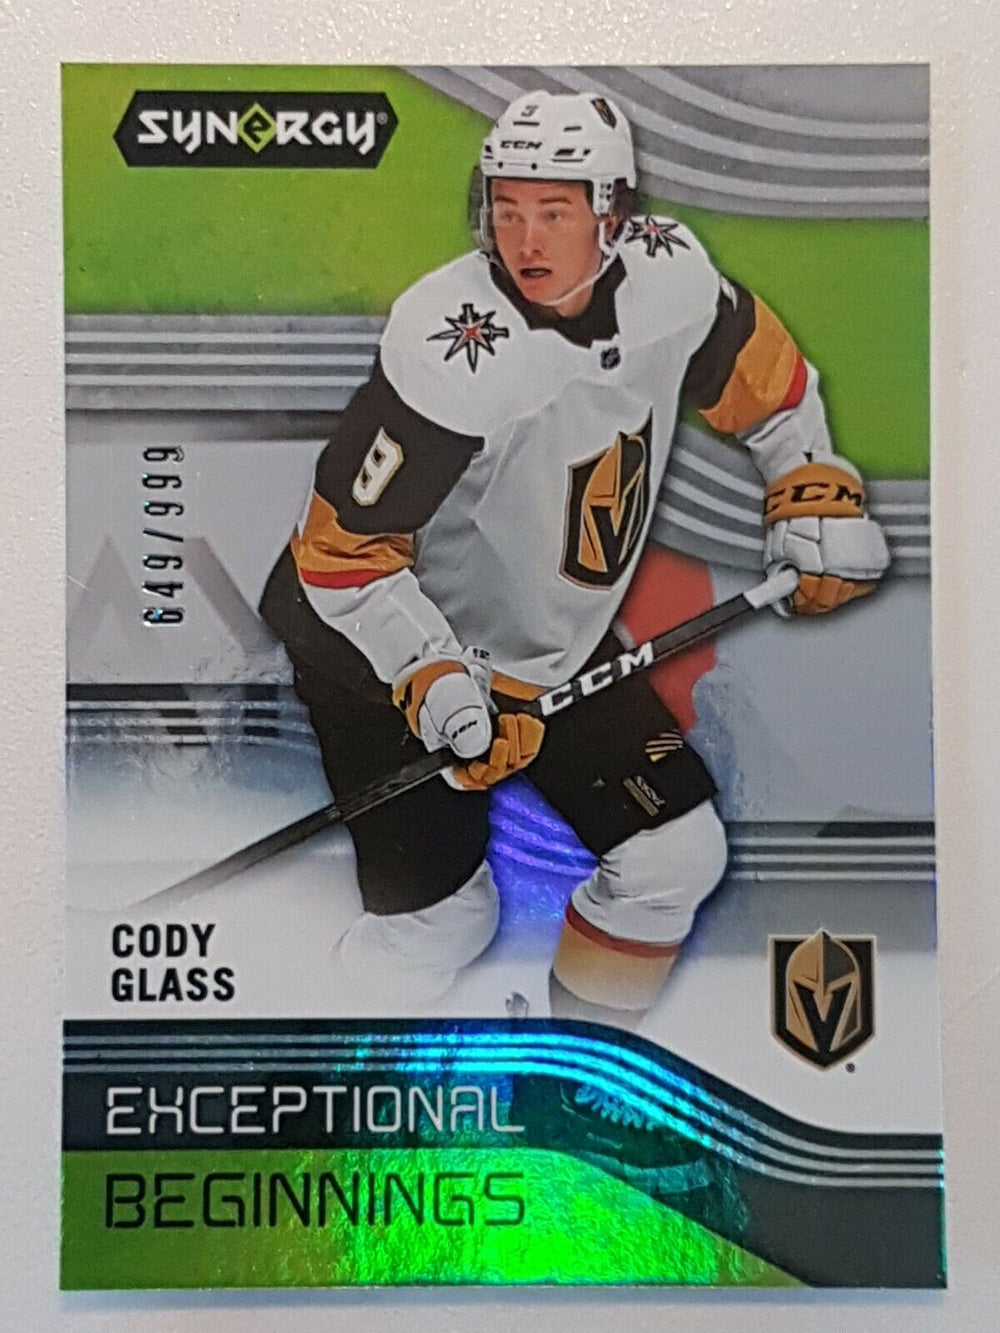 2019-20 Synergy Exceptional Beginnings EB-30 Cody Glass Golden Knights 649/999